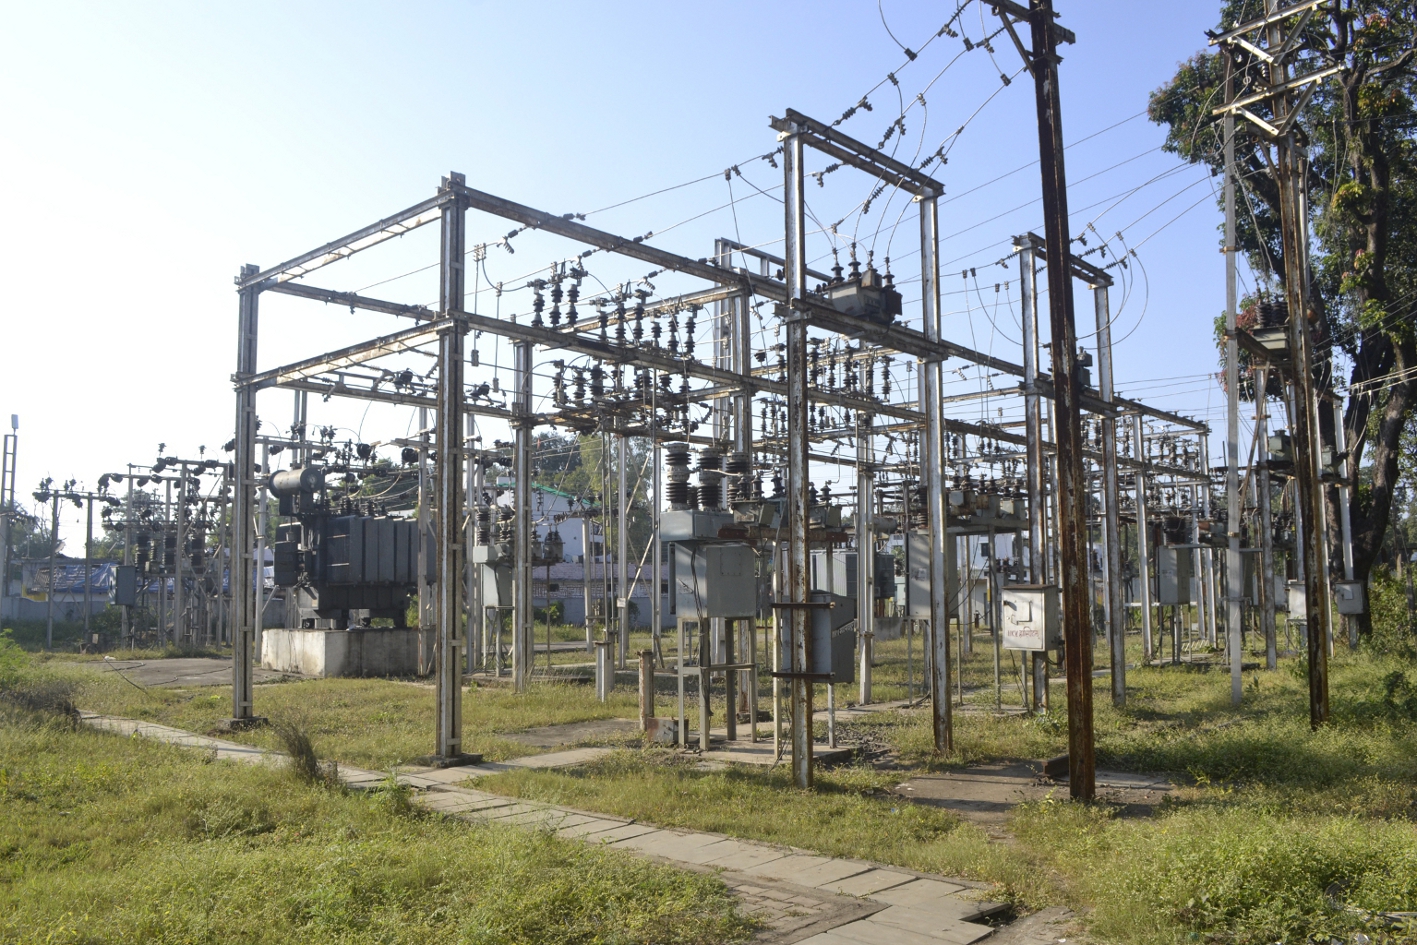 Is Hard to Have Draft of Simple Electricity Plan